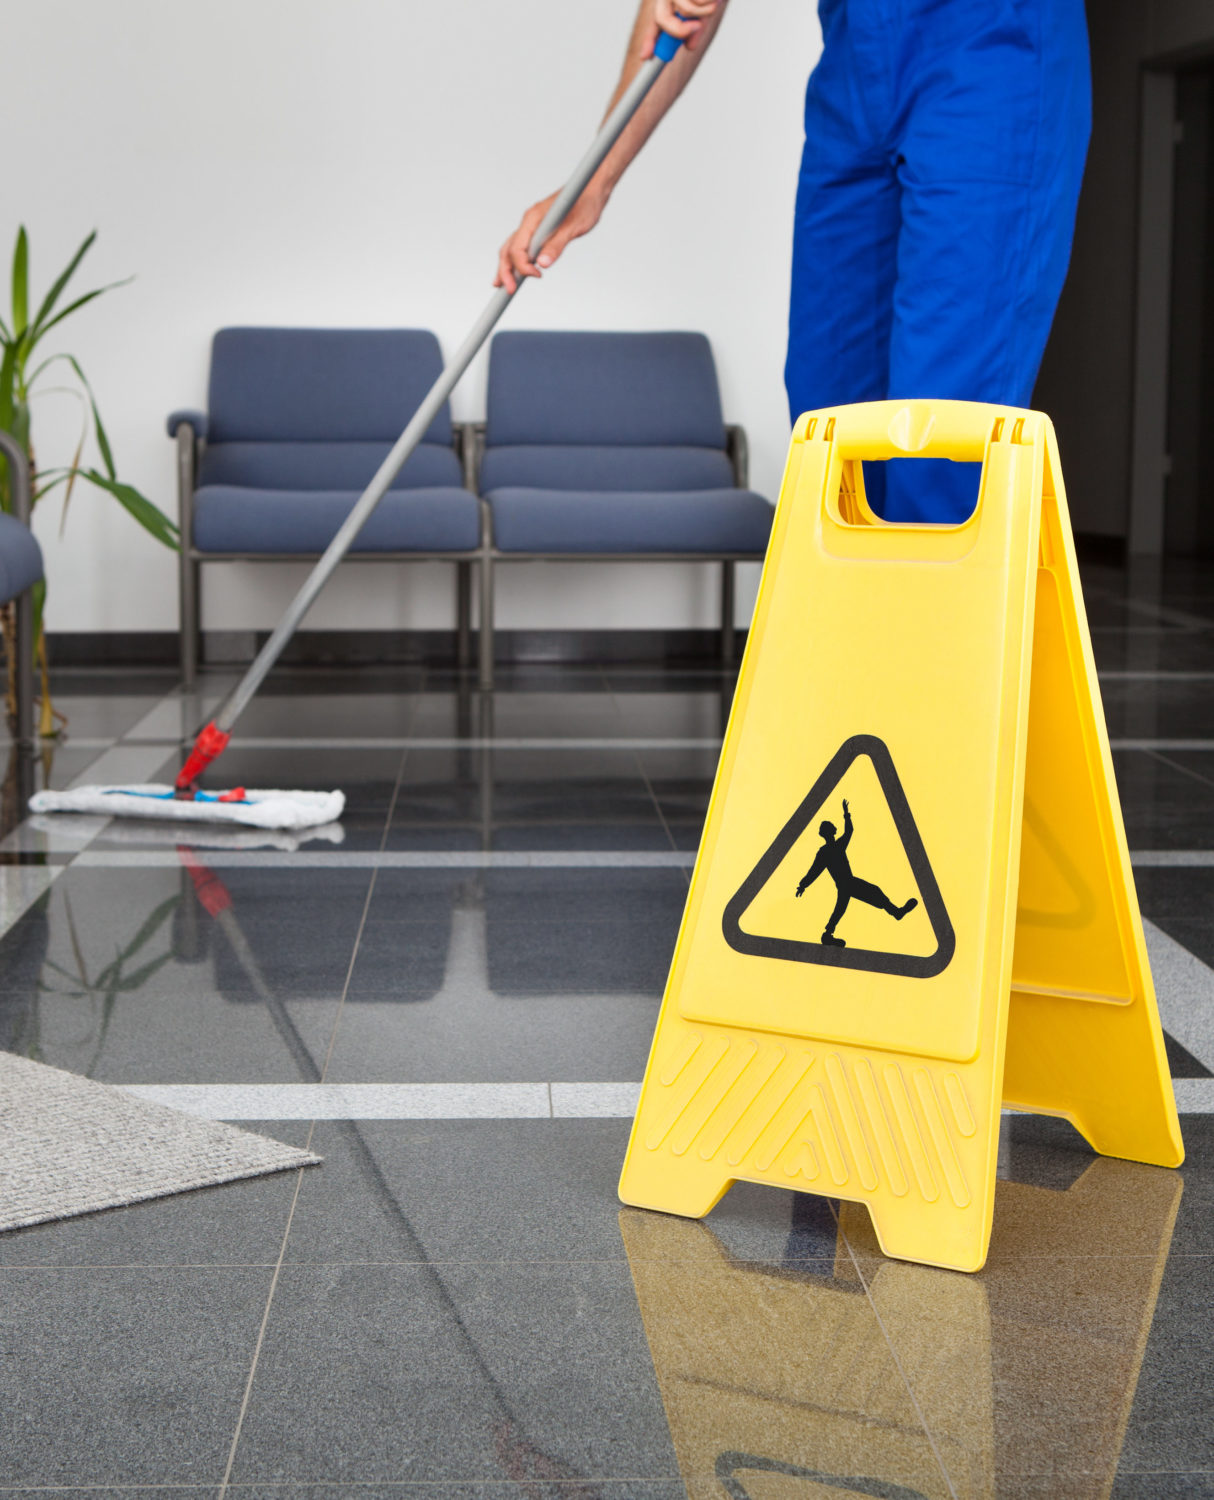 Janitor cleaning with a wet floor sign on the ground